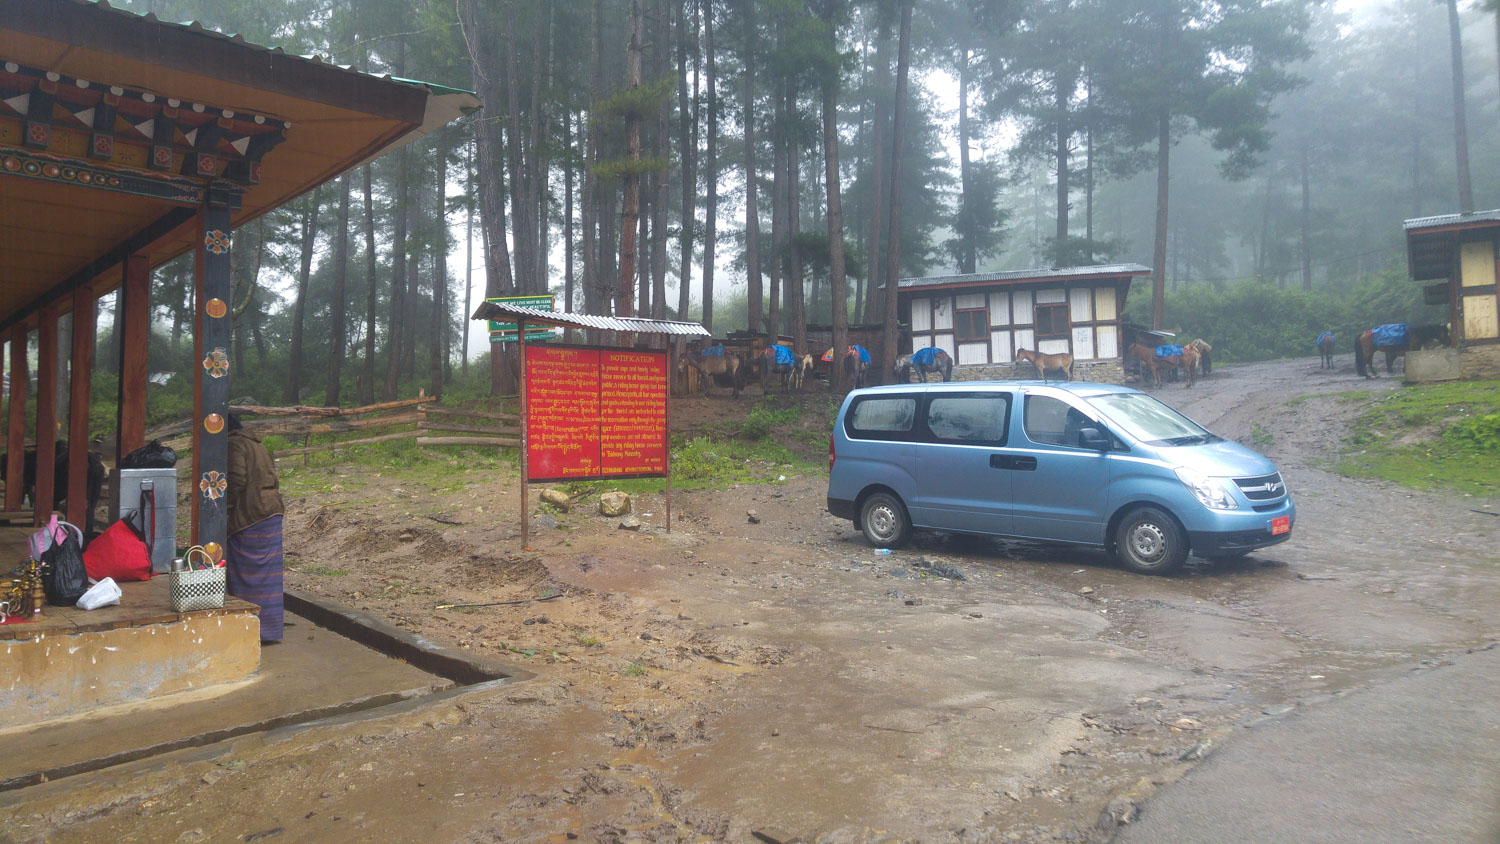 Raining in Bhutan on the way to the Tiger Nest Monastery the most famous landmark in the country